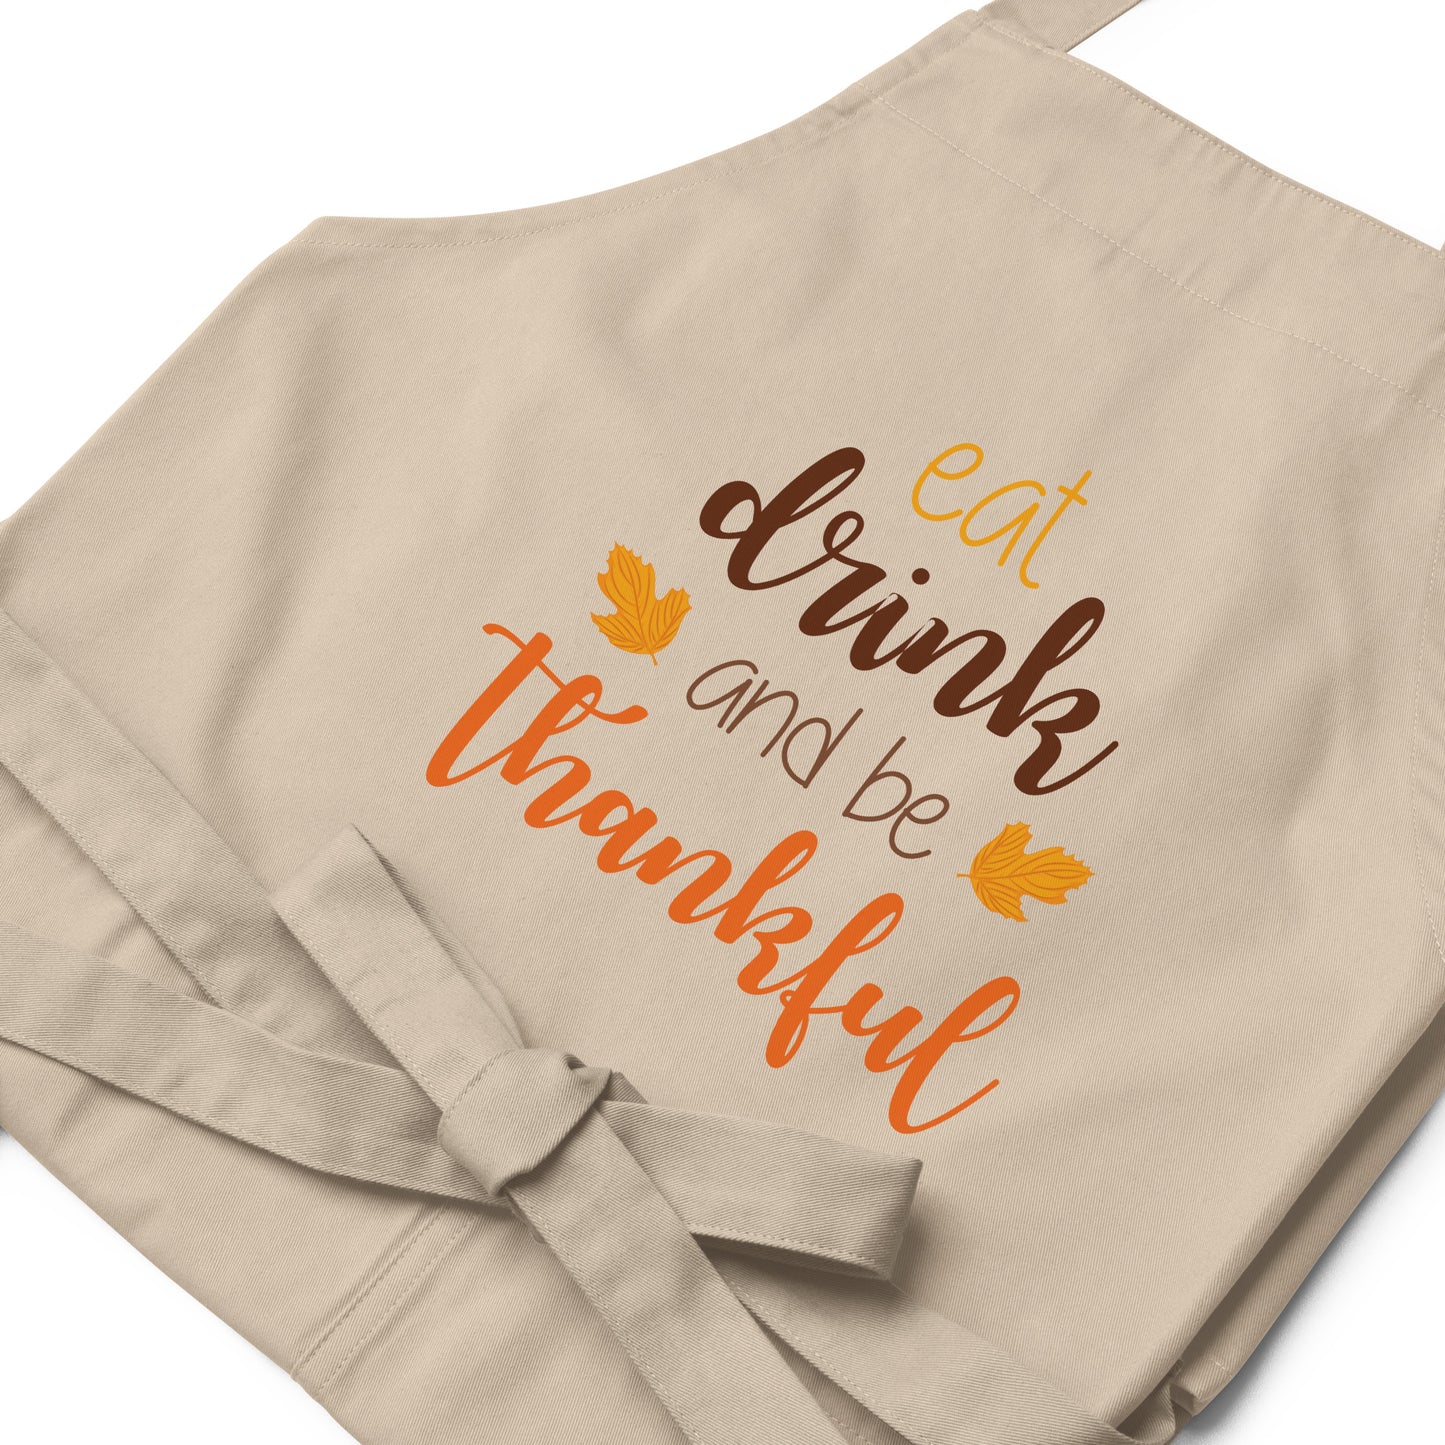 Eat Drink and be Thankful Organic cotton apron